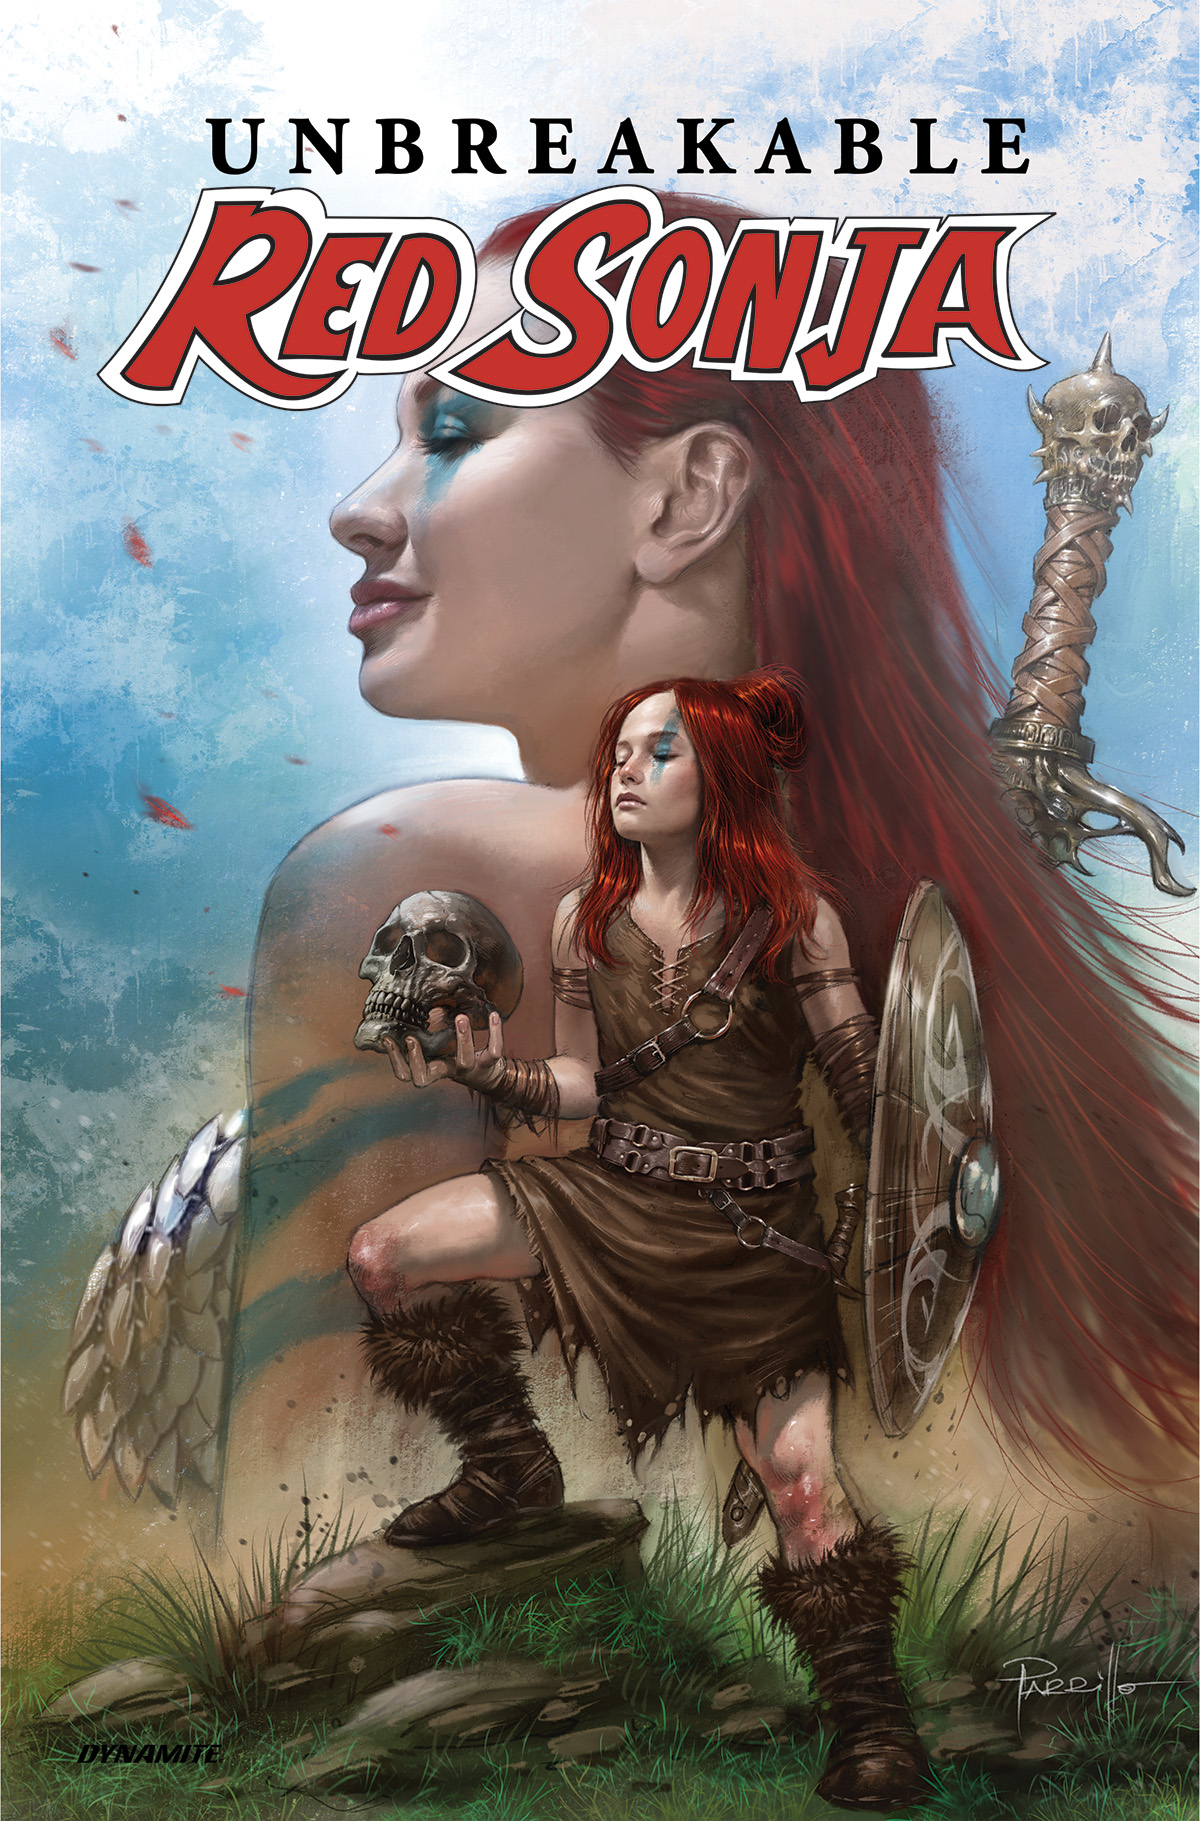 Unbreakable Red Sonja Graphic Novel